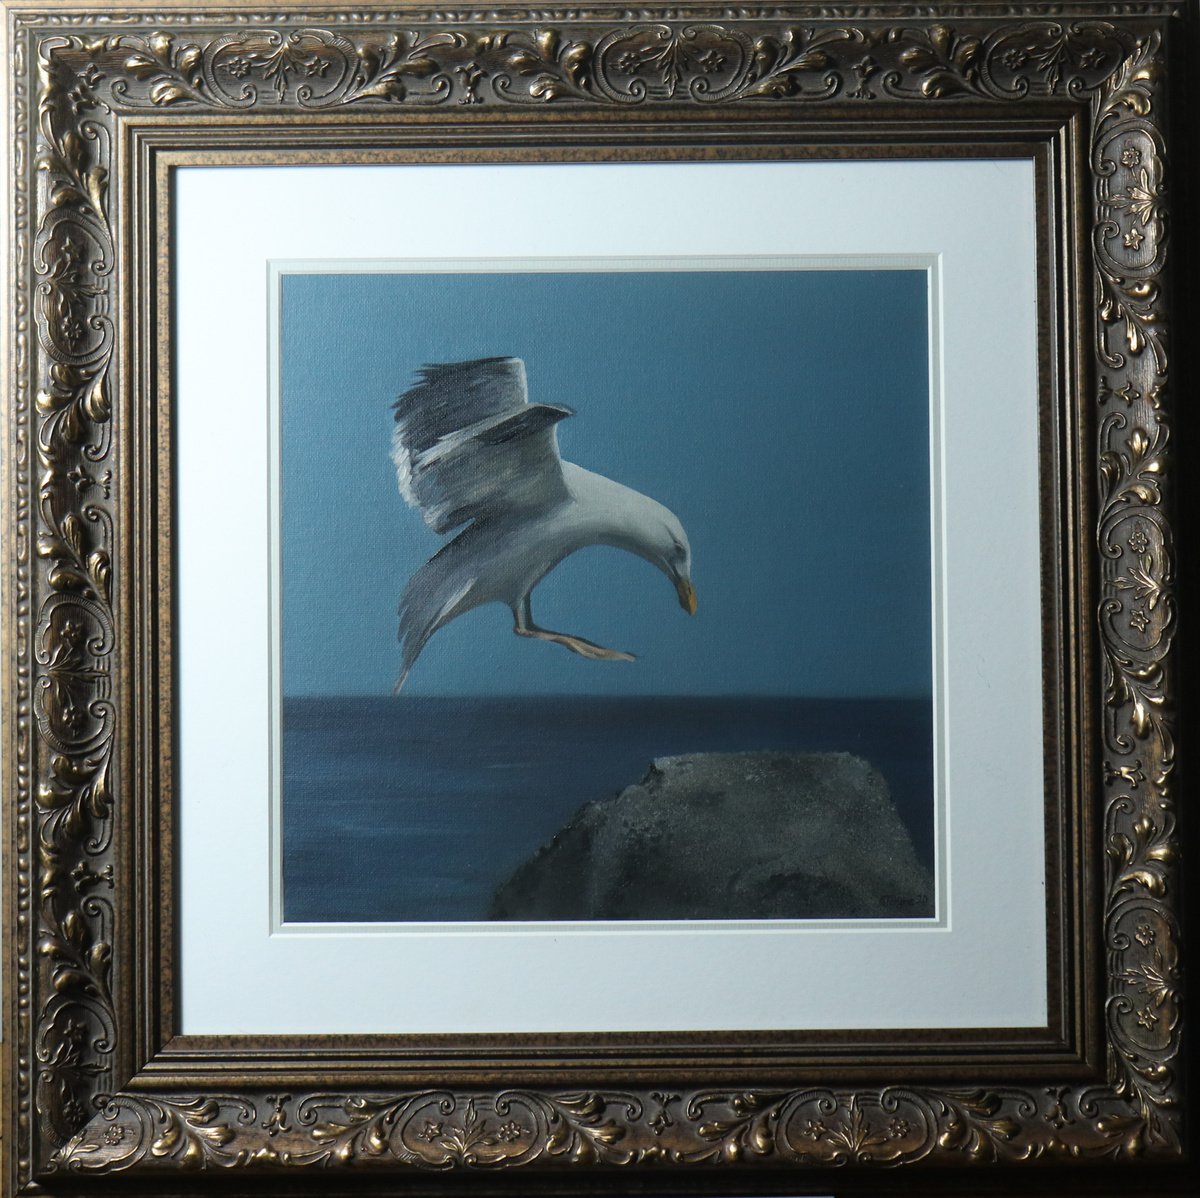 Voice of the Sea Series - Seagull in Flight, Bird Art by Alex Jabore by Alex Jabore Paintings and Prints